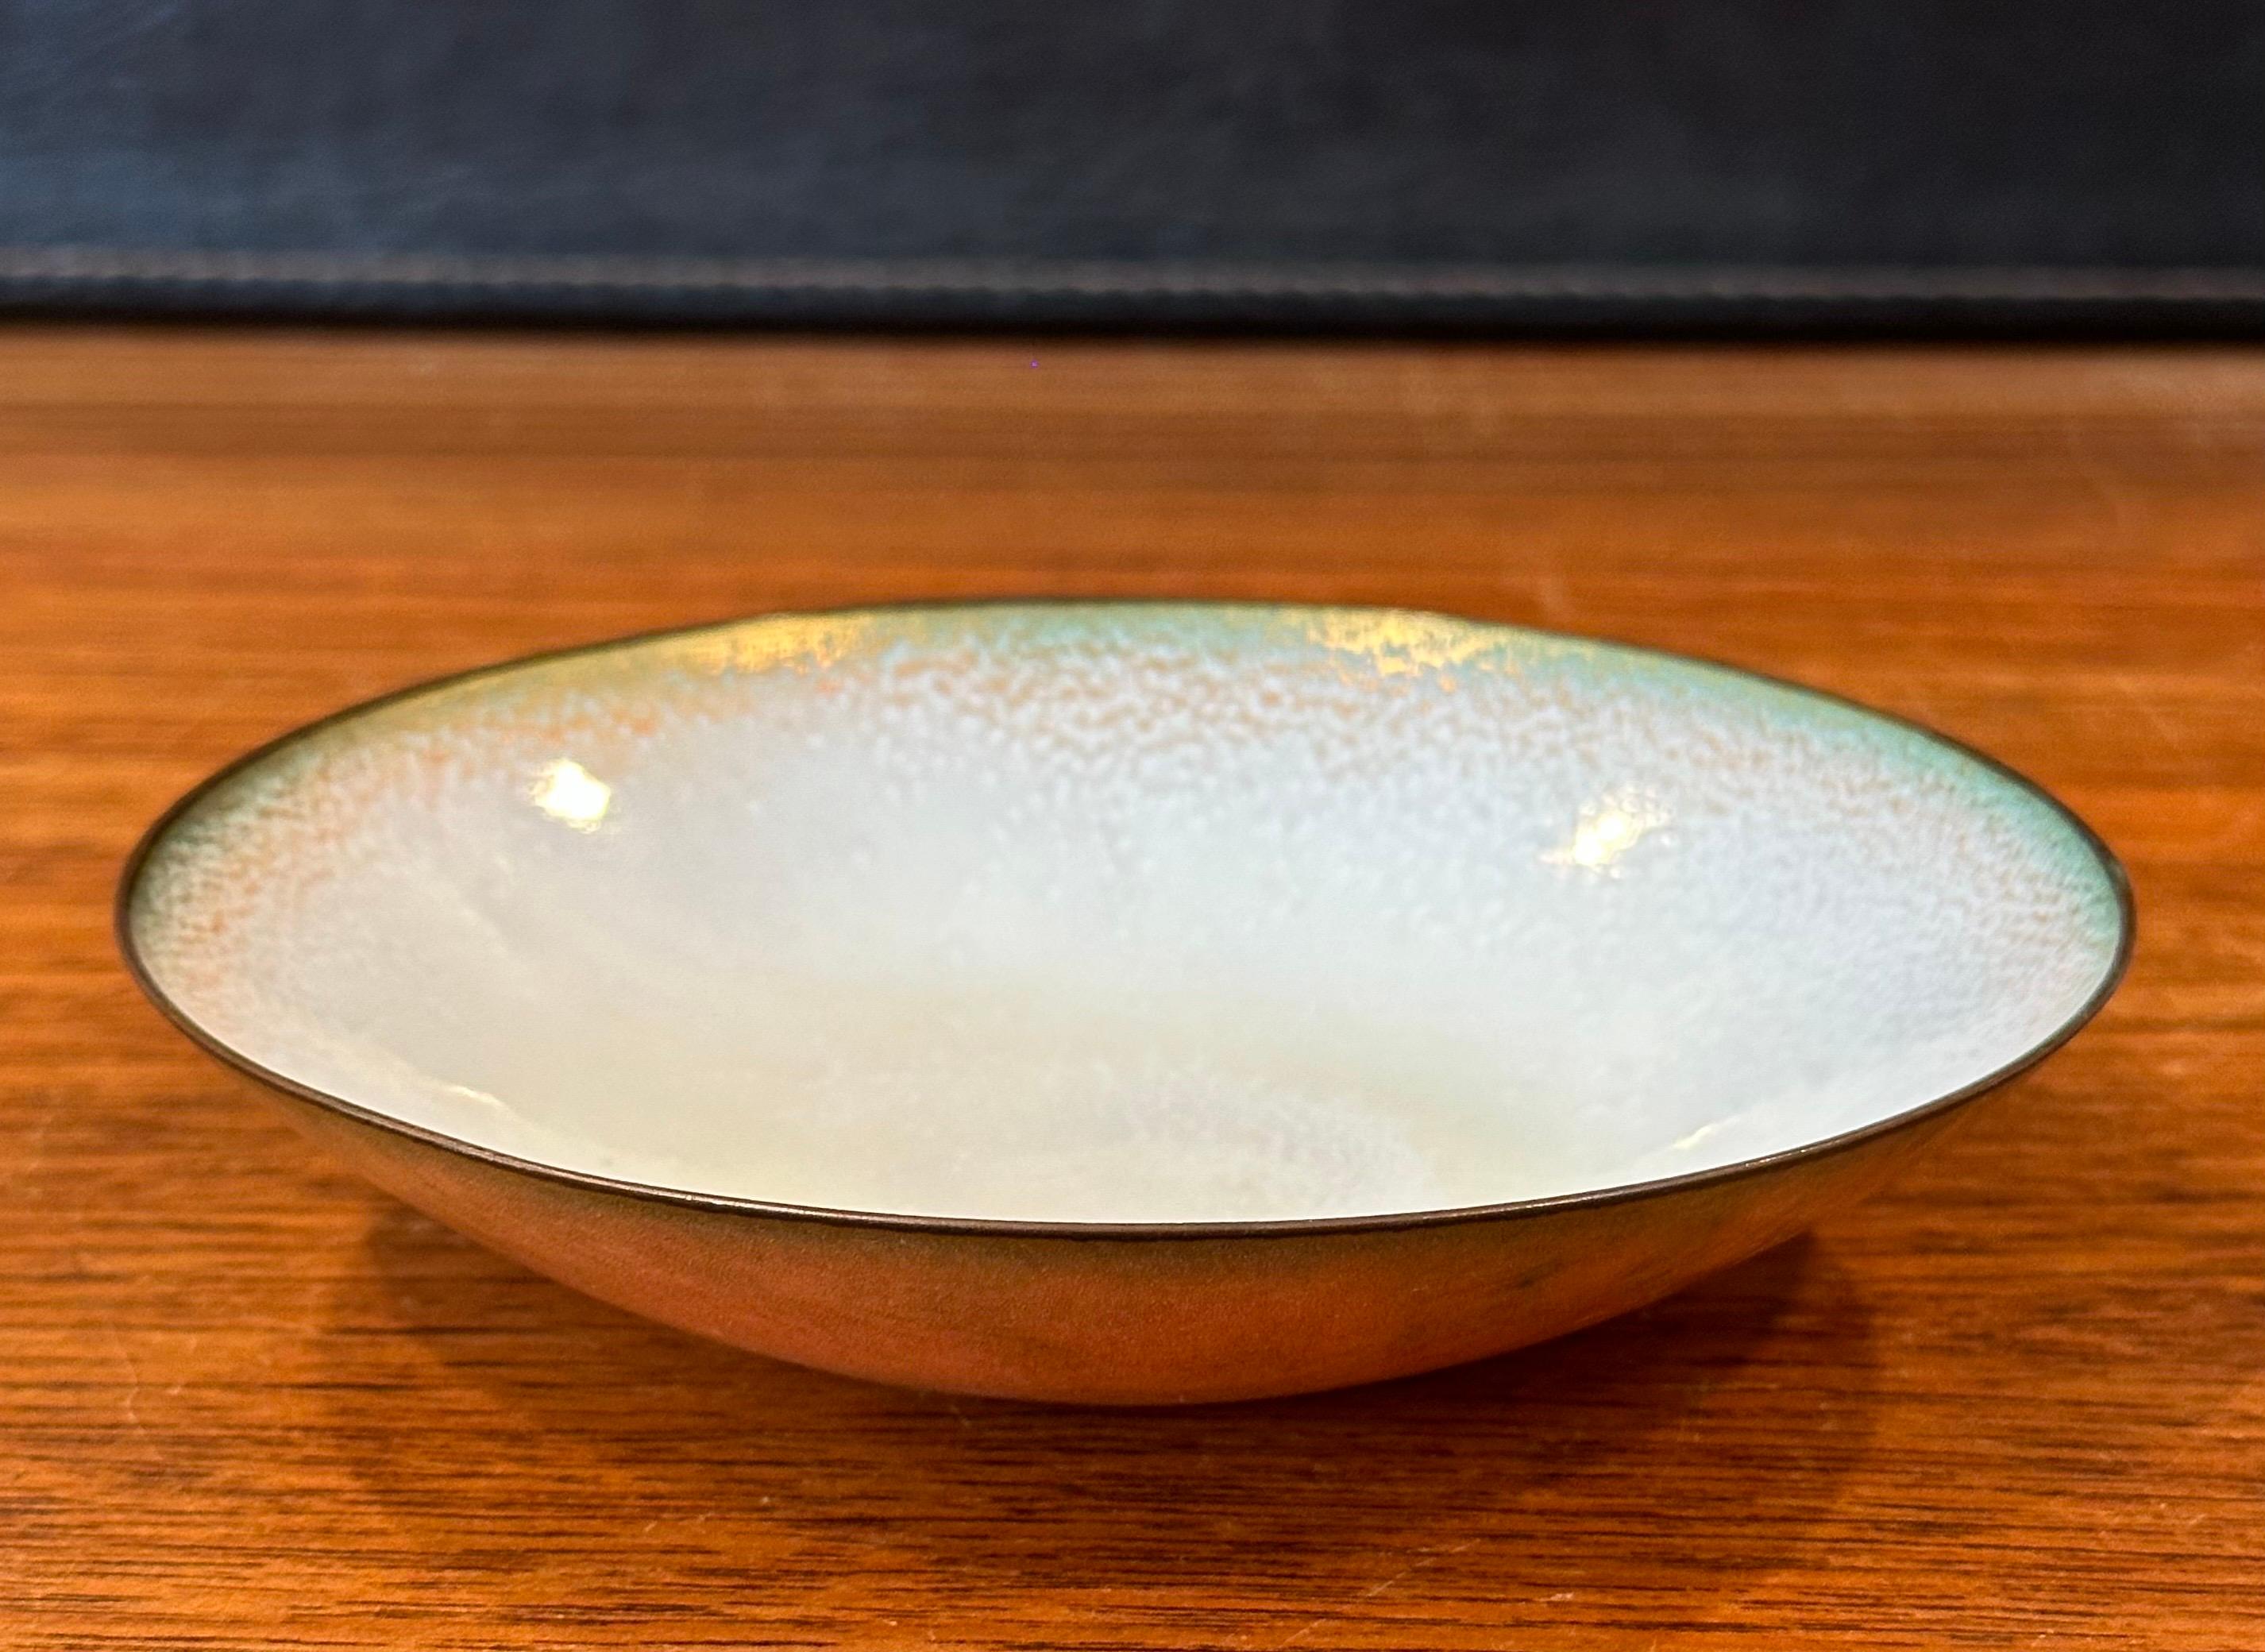 California Design Enamel on Copper Small Dish by Leon Statham In Good Condition For Sale In San Diego, CA